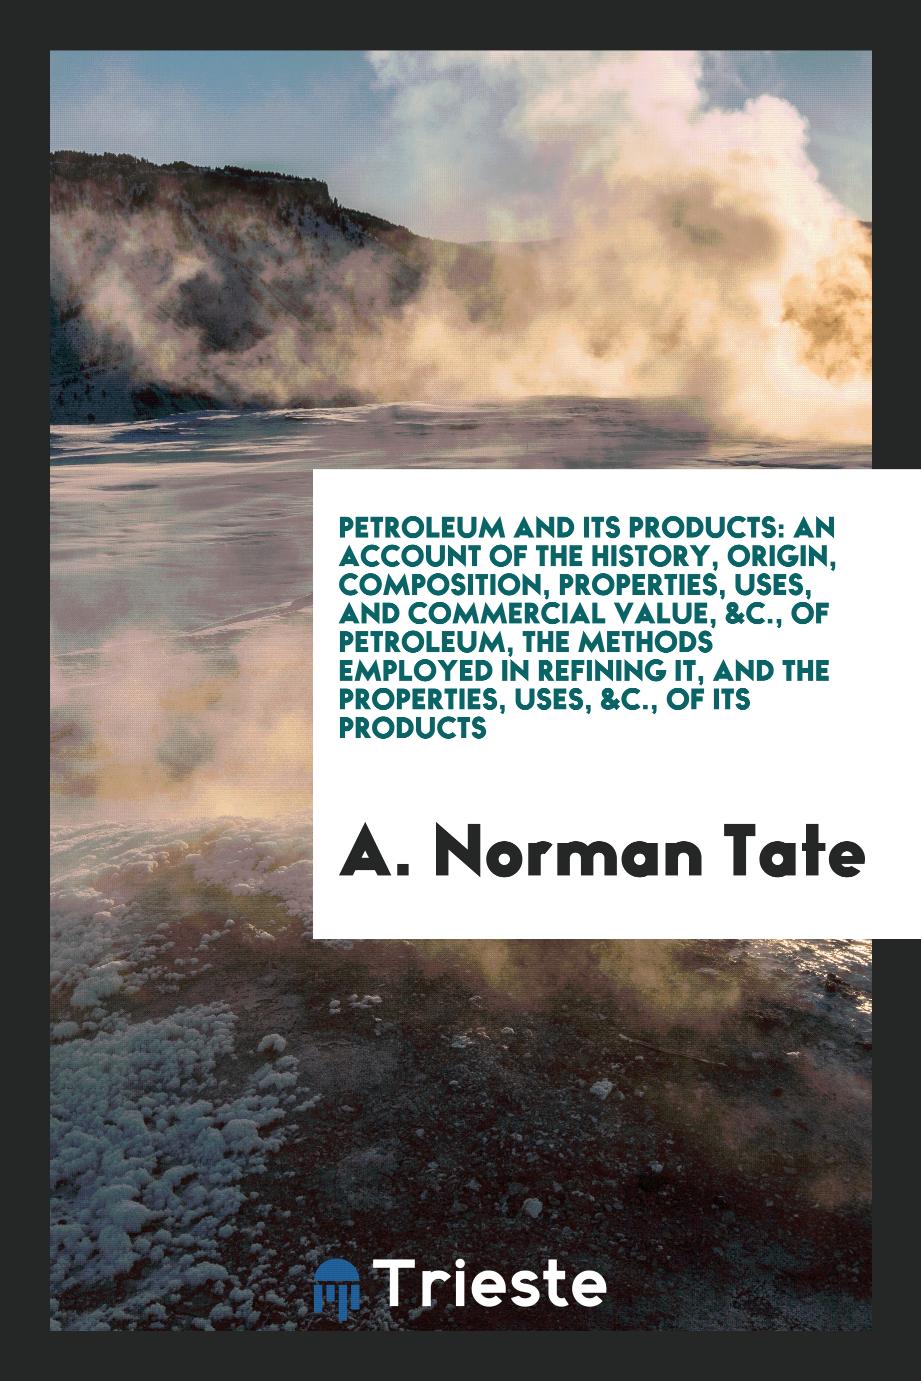 Petroleum and Its Products: An Account of the History, Origin, Composition, Properties, Uses, and Commercial Value, &c., of Petroleum, the Methods Employed in Refining It, and the Properties, Uses, &C., of Its Products